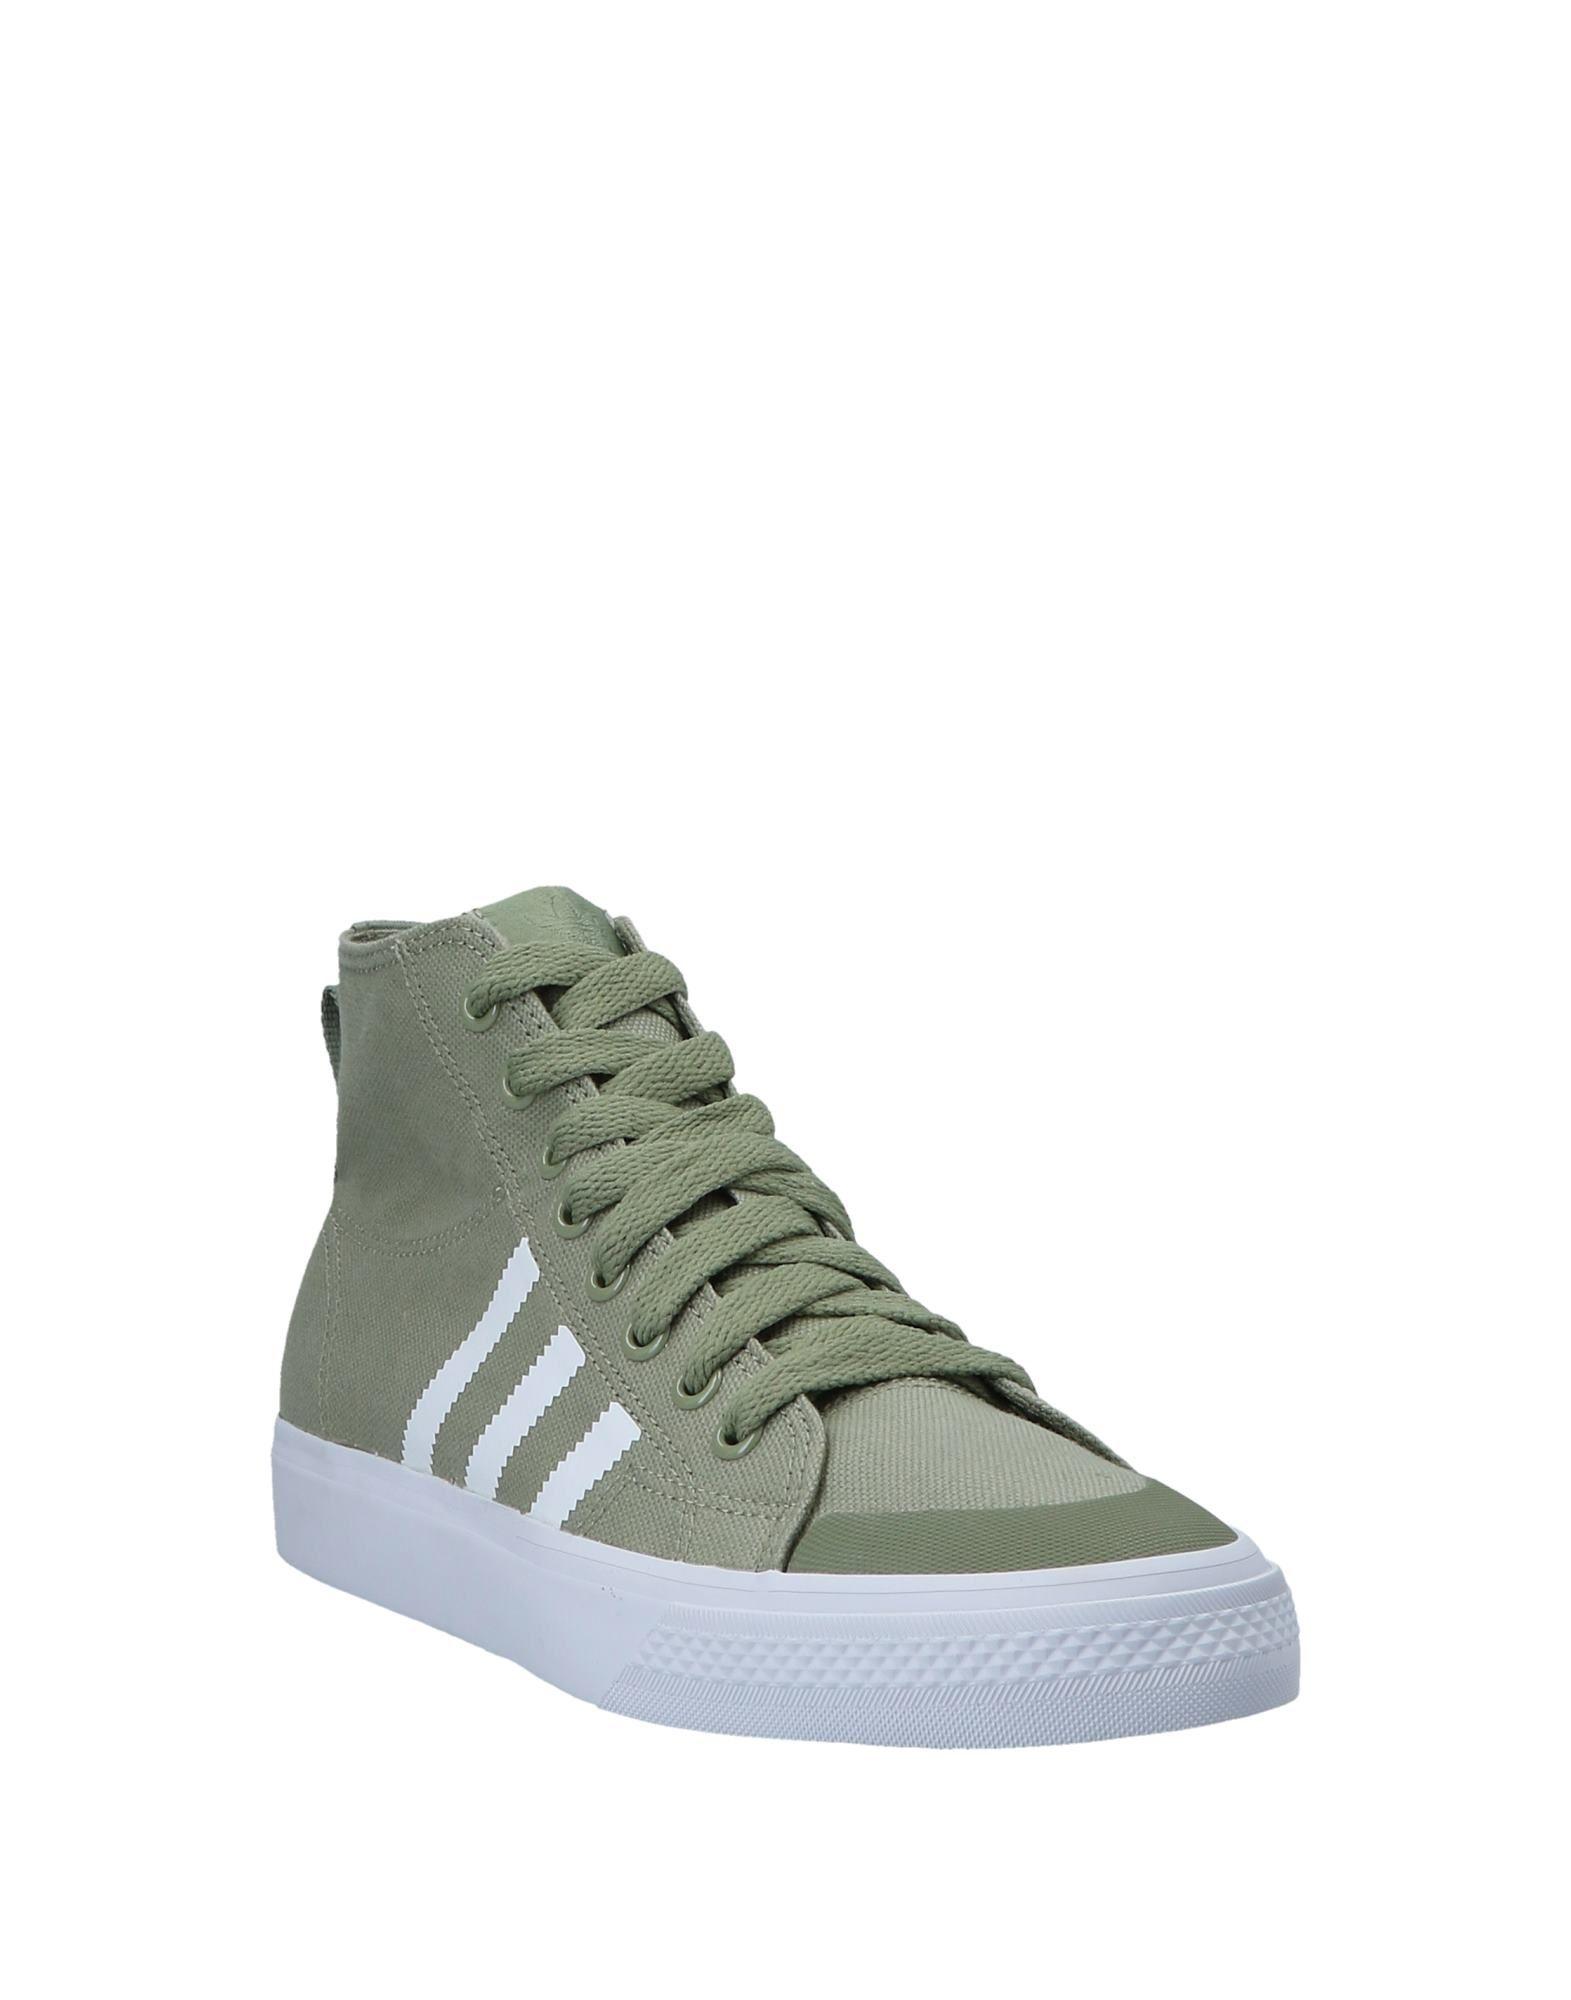 Shoes Mens Shoes Sneakers & Athletic Shoes Hi Tops Men’s High Top Canvas Shoes Green 